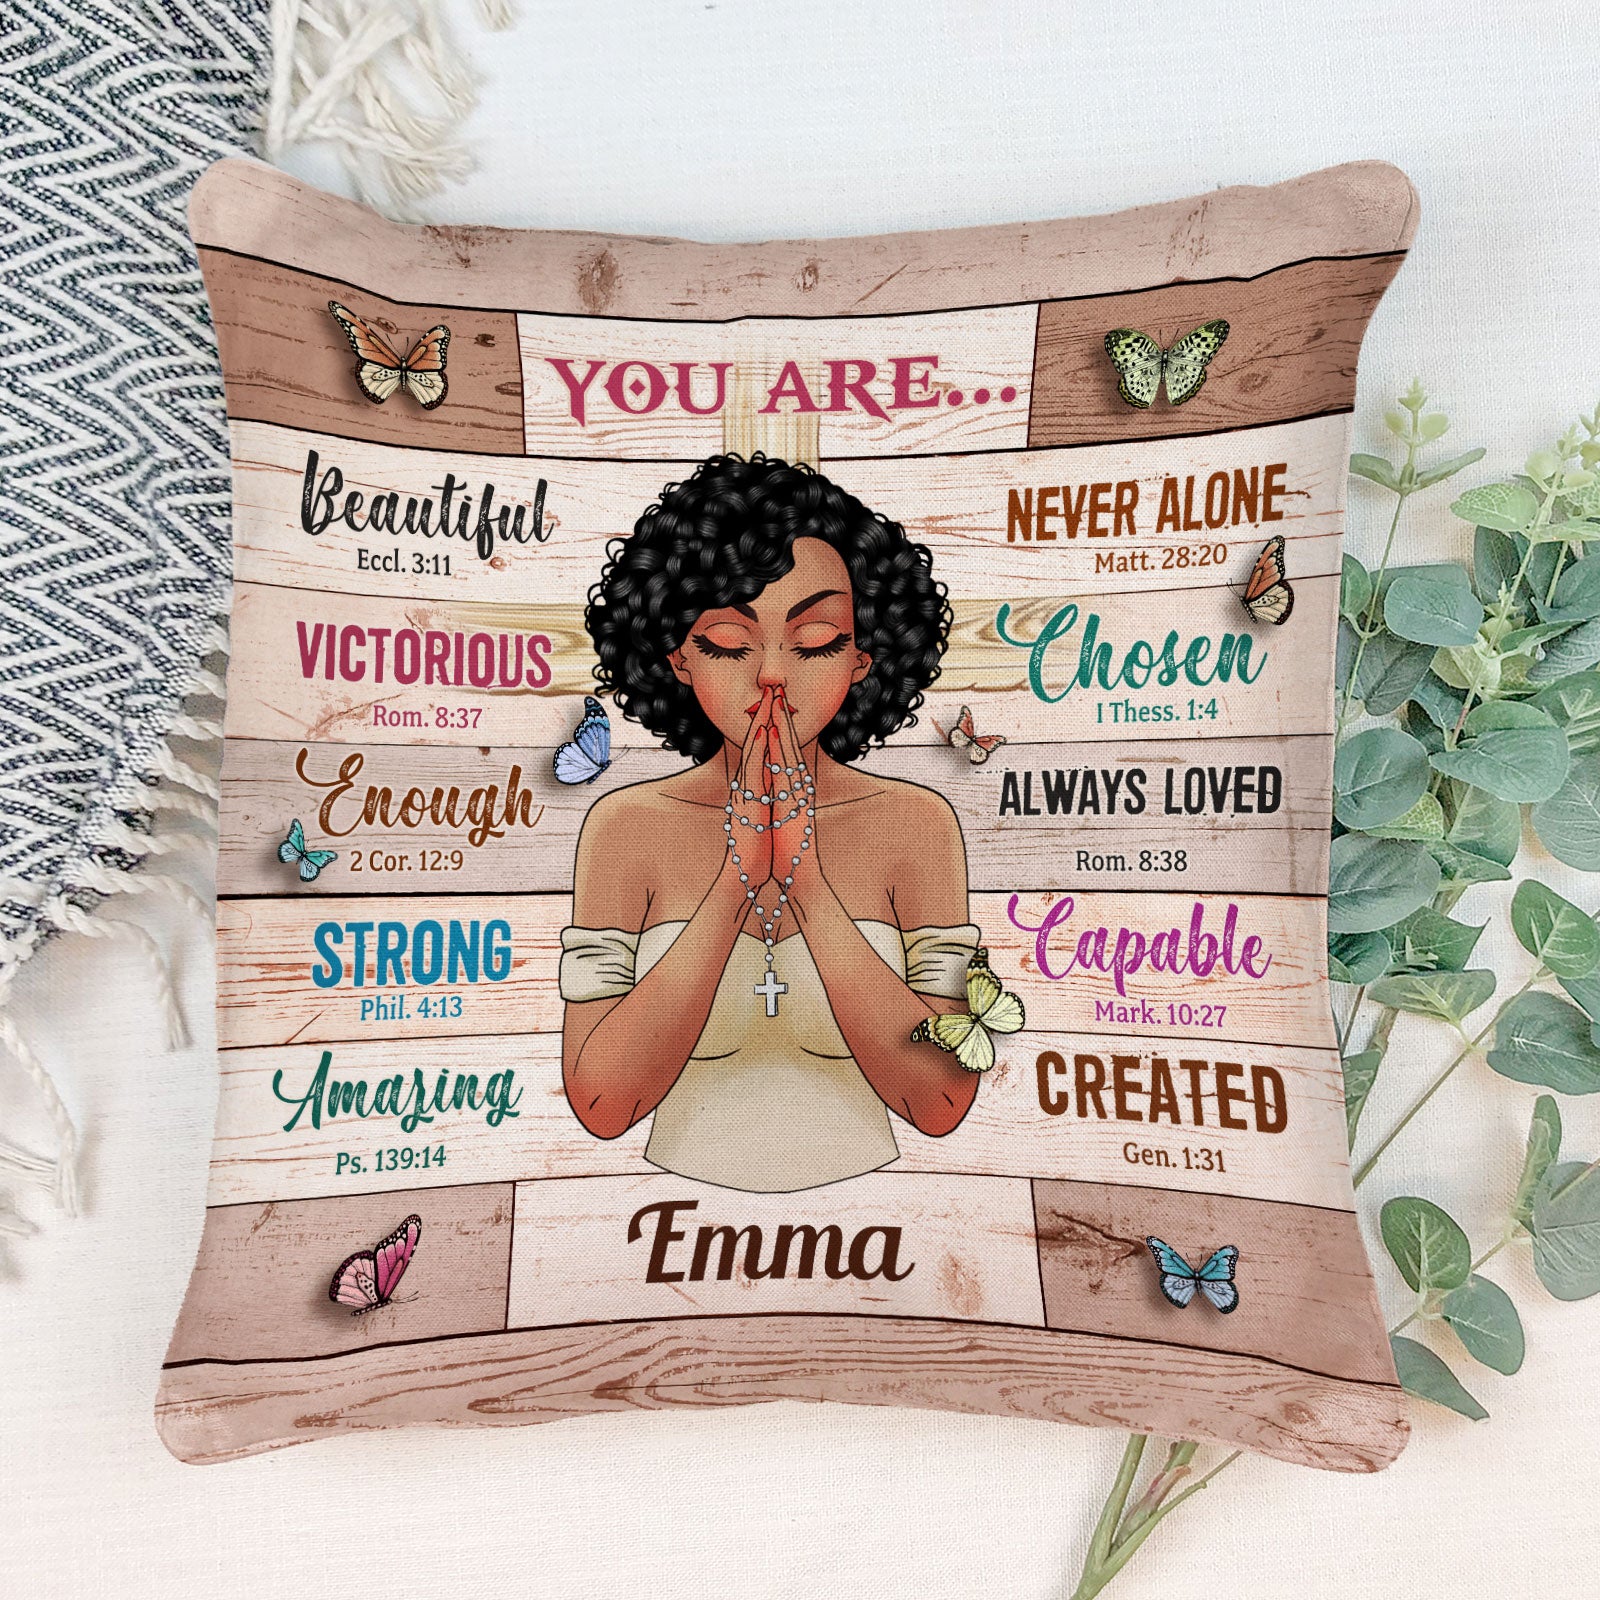 You Are Beautiful - Personalized Pillow - Birthday Gift For Girls, Black Girls